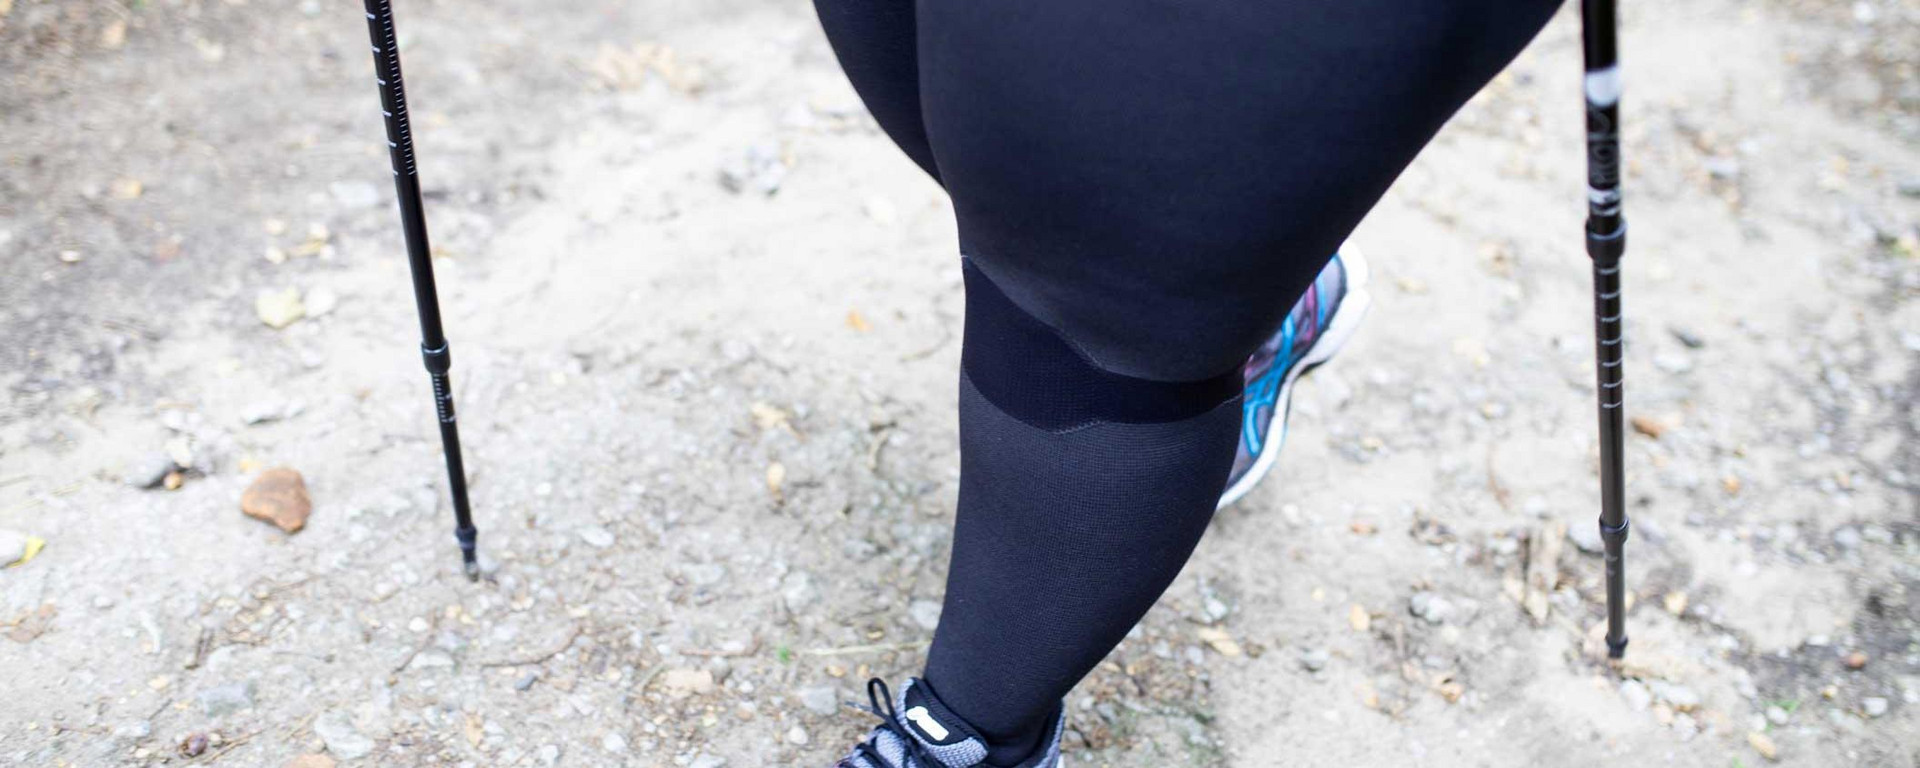 Compression Stockings as a Treatment Option for Lipedema and